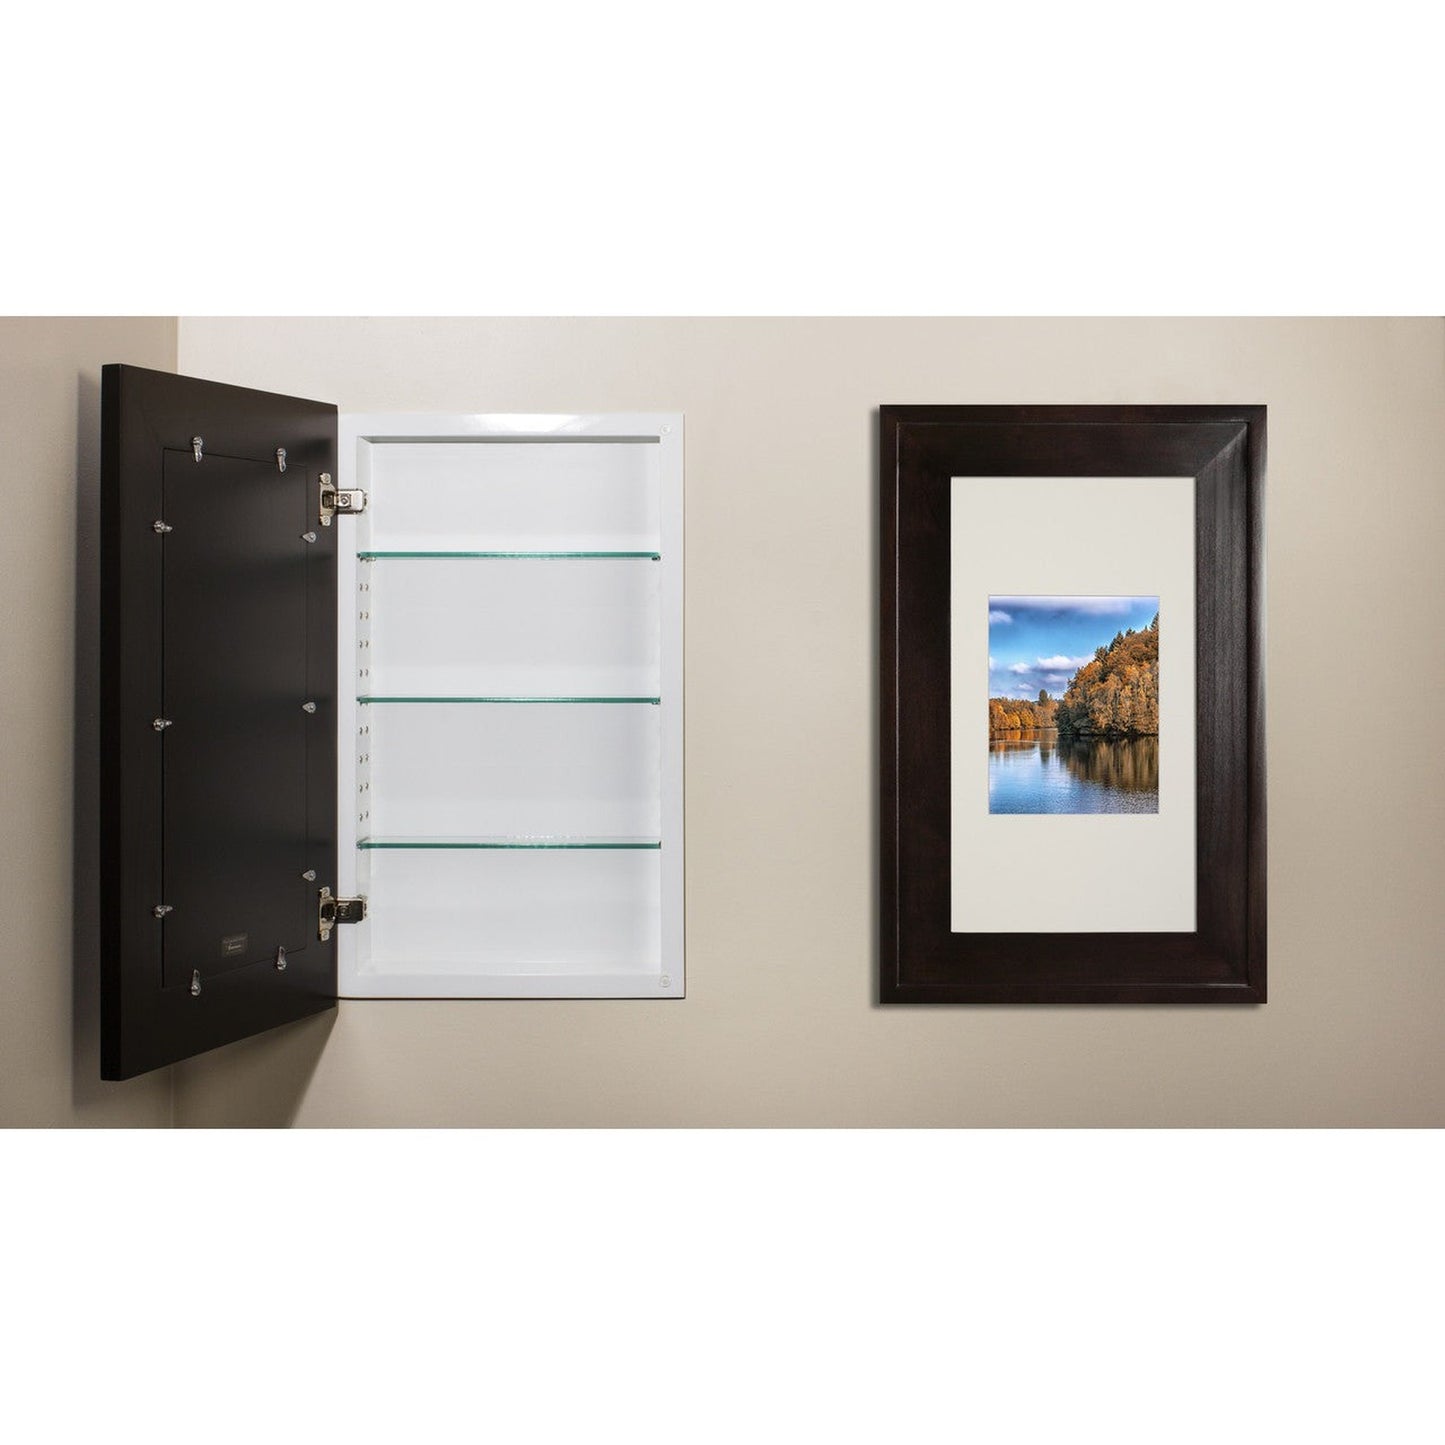 Fox Hollow Furnishings 14" x 24" Coffee Bean Extra Large Natural Interior Standard Depth Recessed Picture Frame Medicine Cabinet With Mirror and White Matting